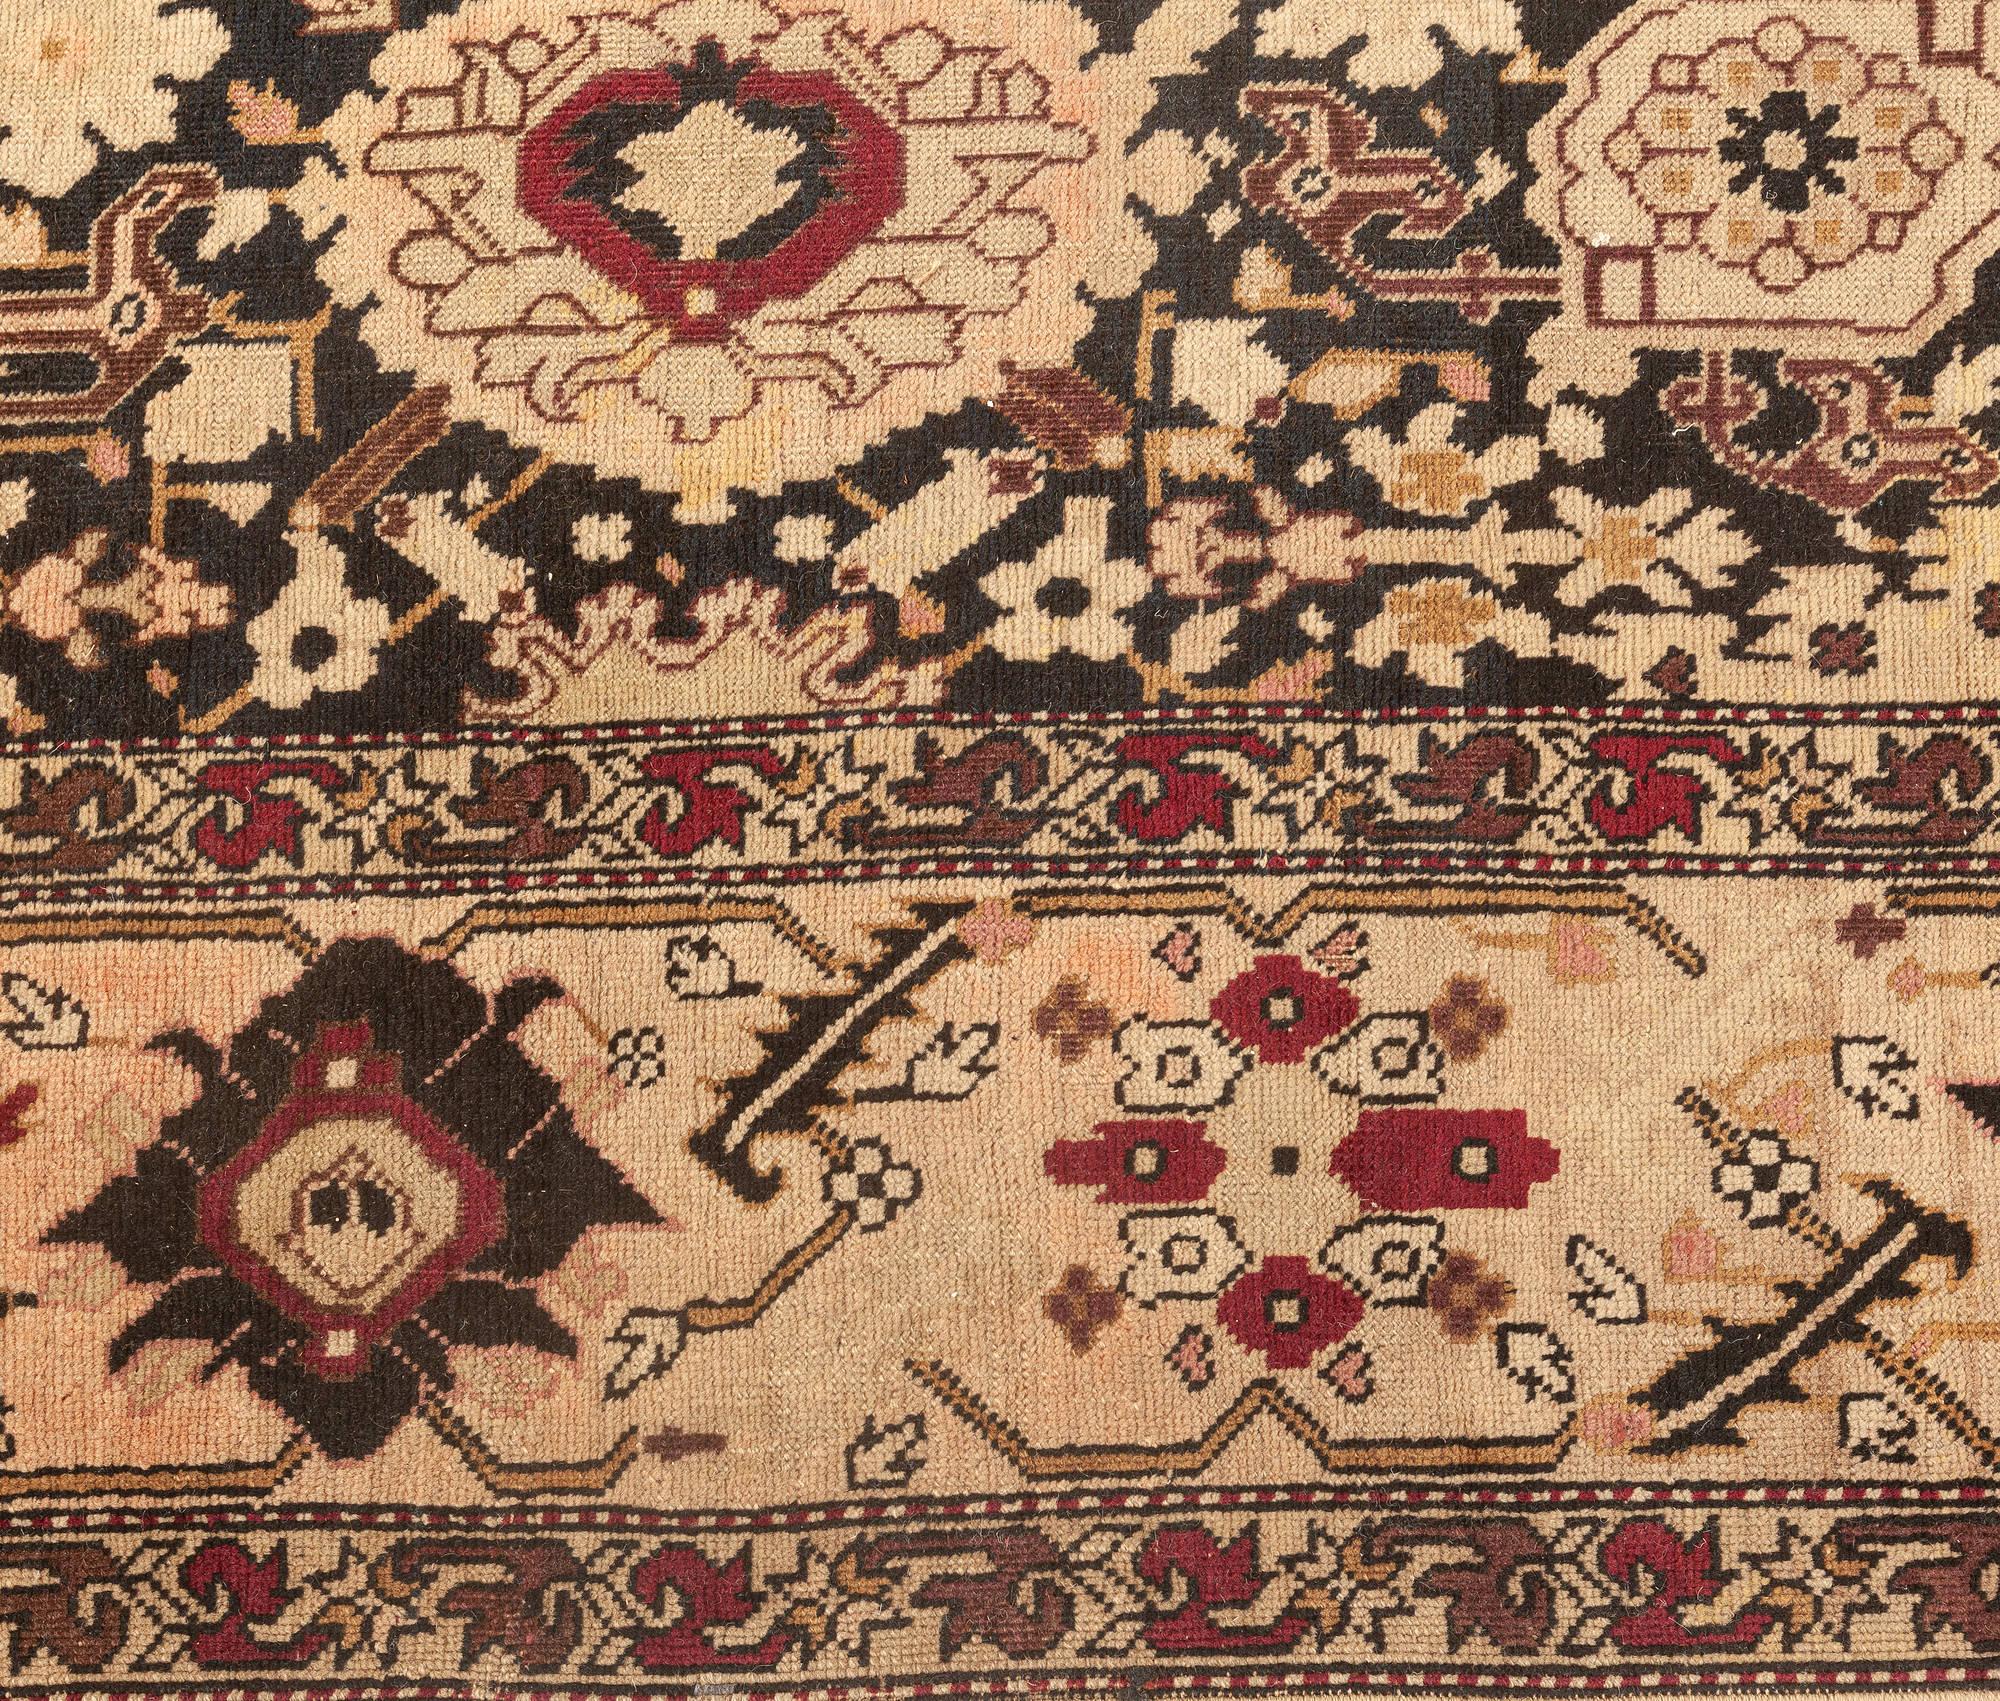 19th Century Karabagh Botanic Handmade Wool Carpet In Good Condition For Sale In New York, NY